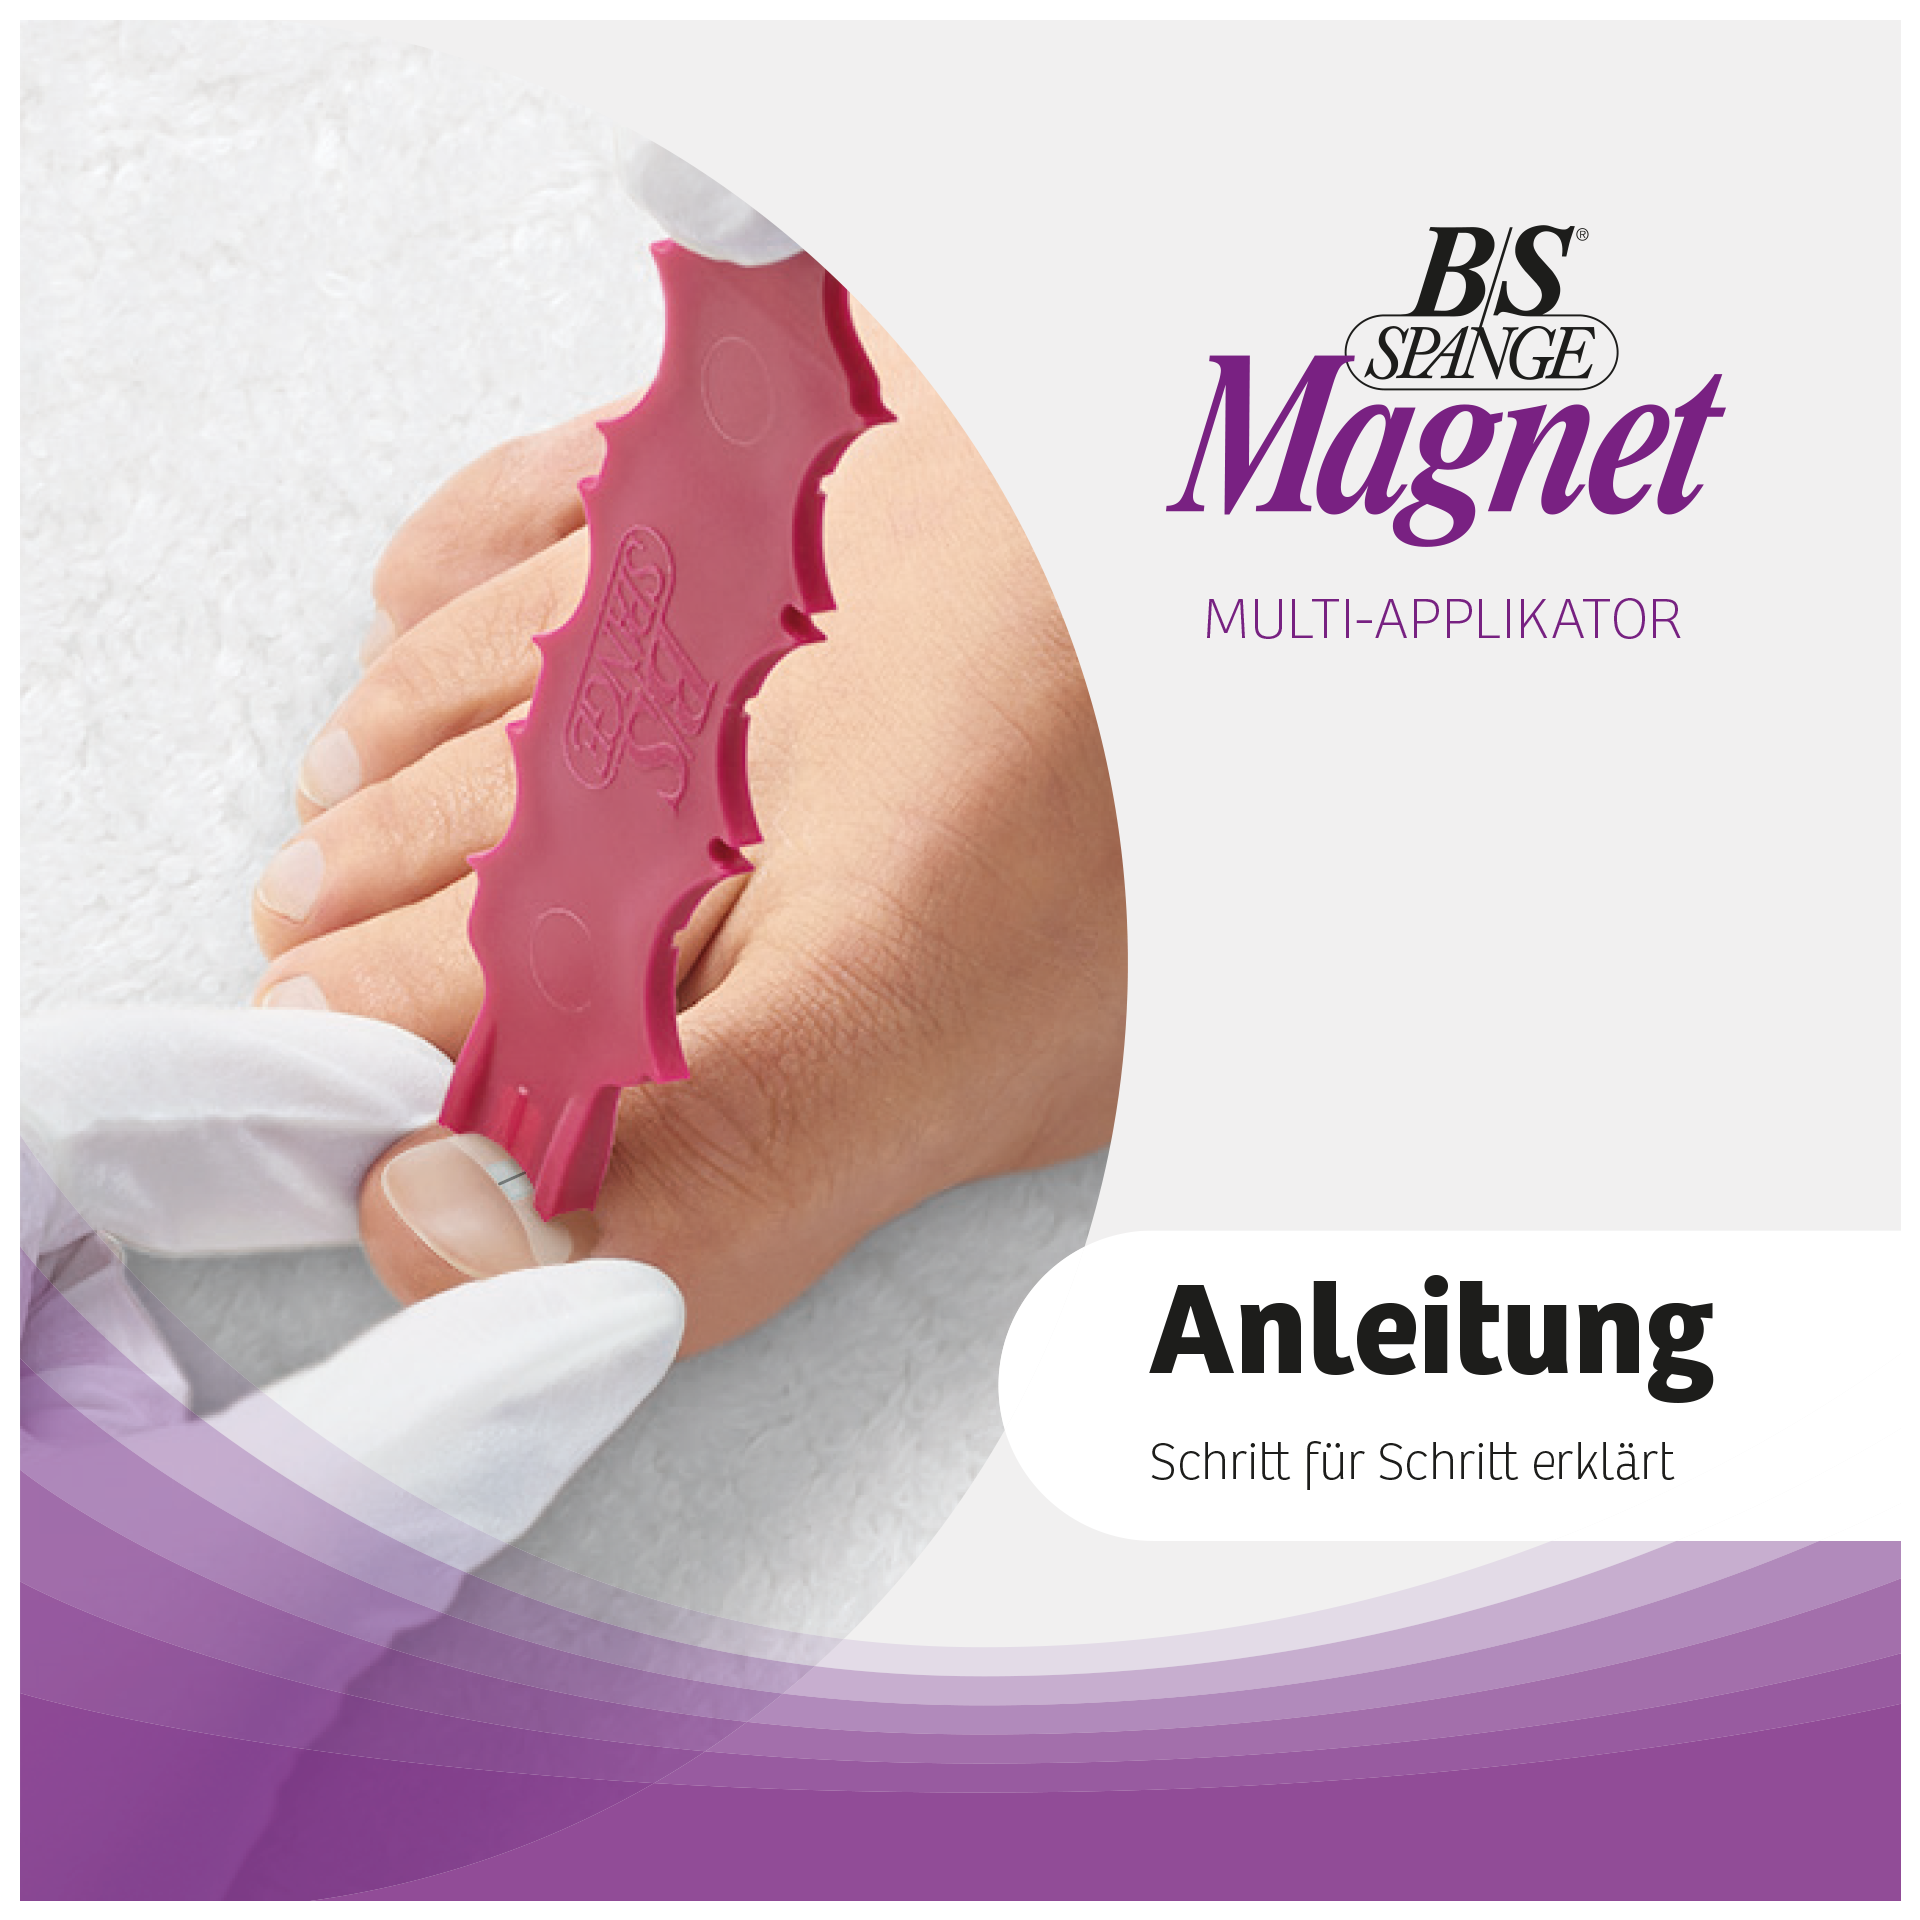 B/S Anleitung - Magnet System